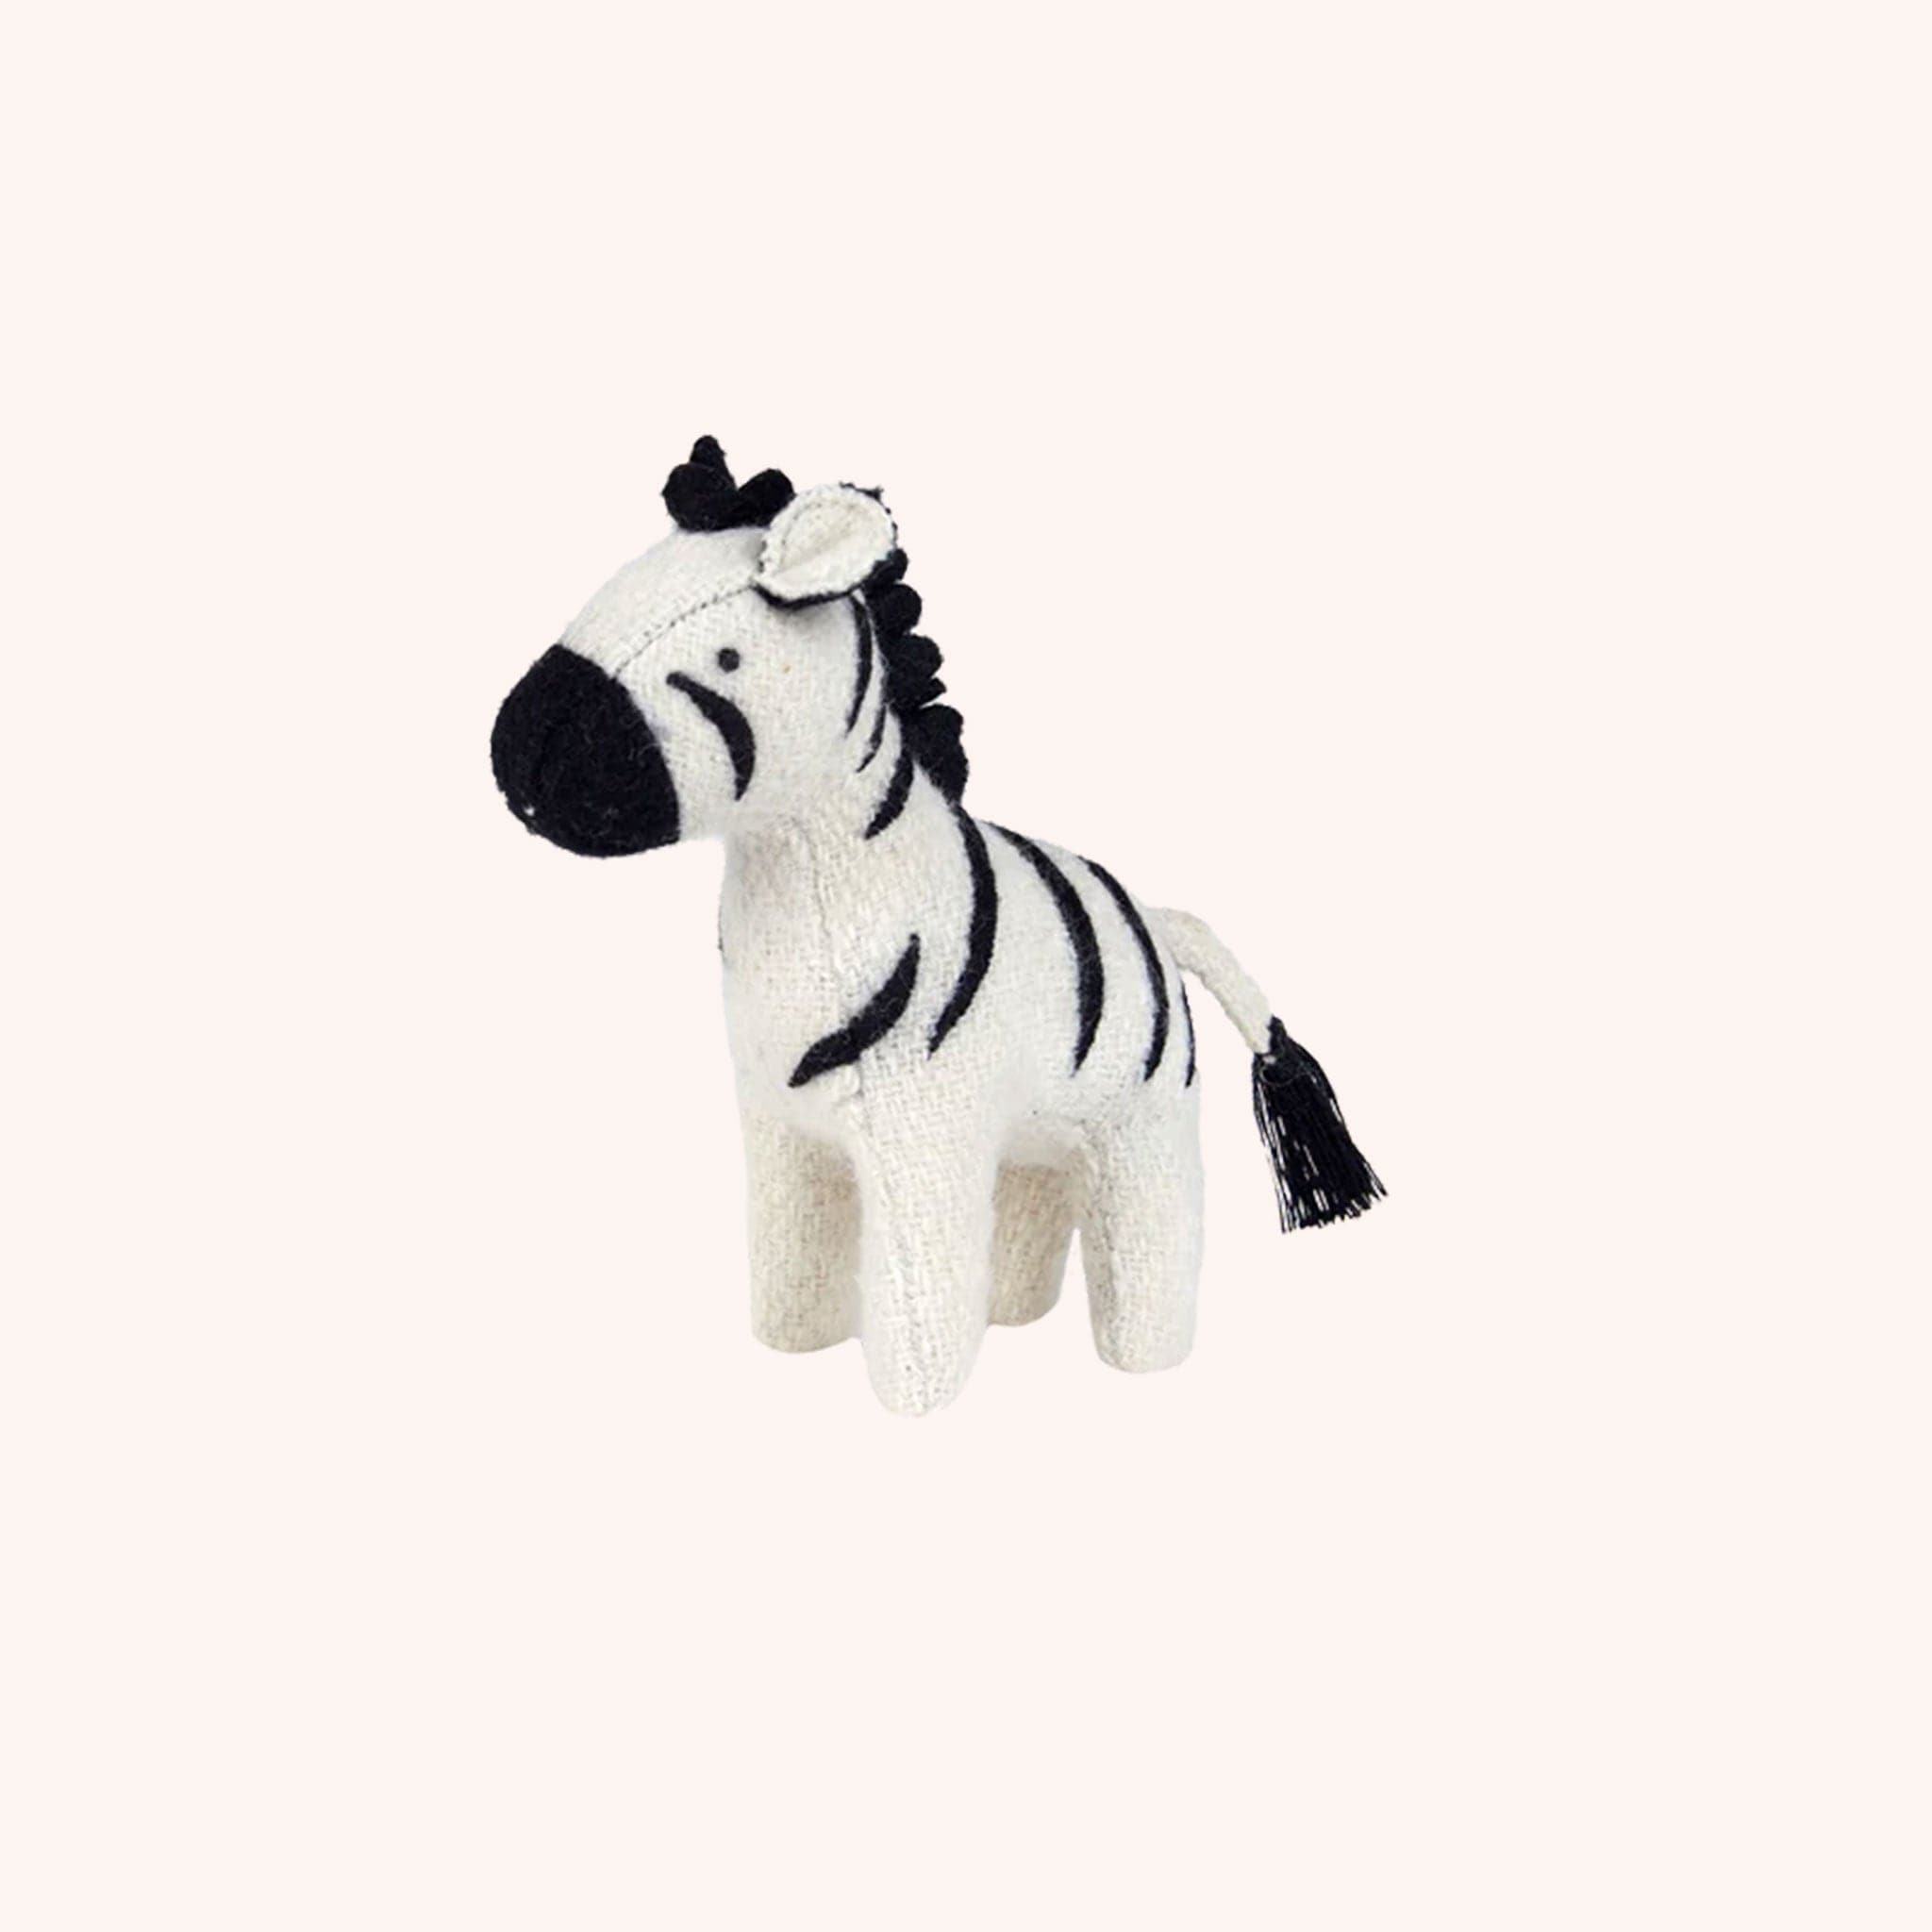 A purple elephant, a teal rhino and a black and white zebra stuffed animal set perfect for the little ones.